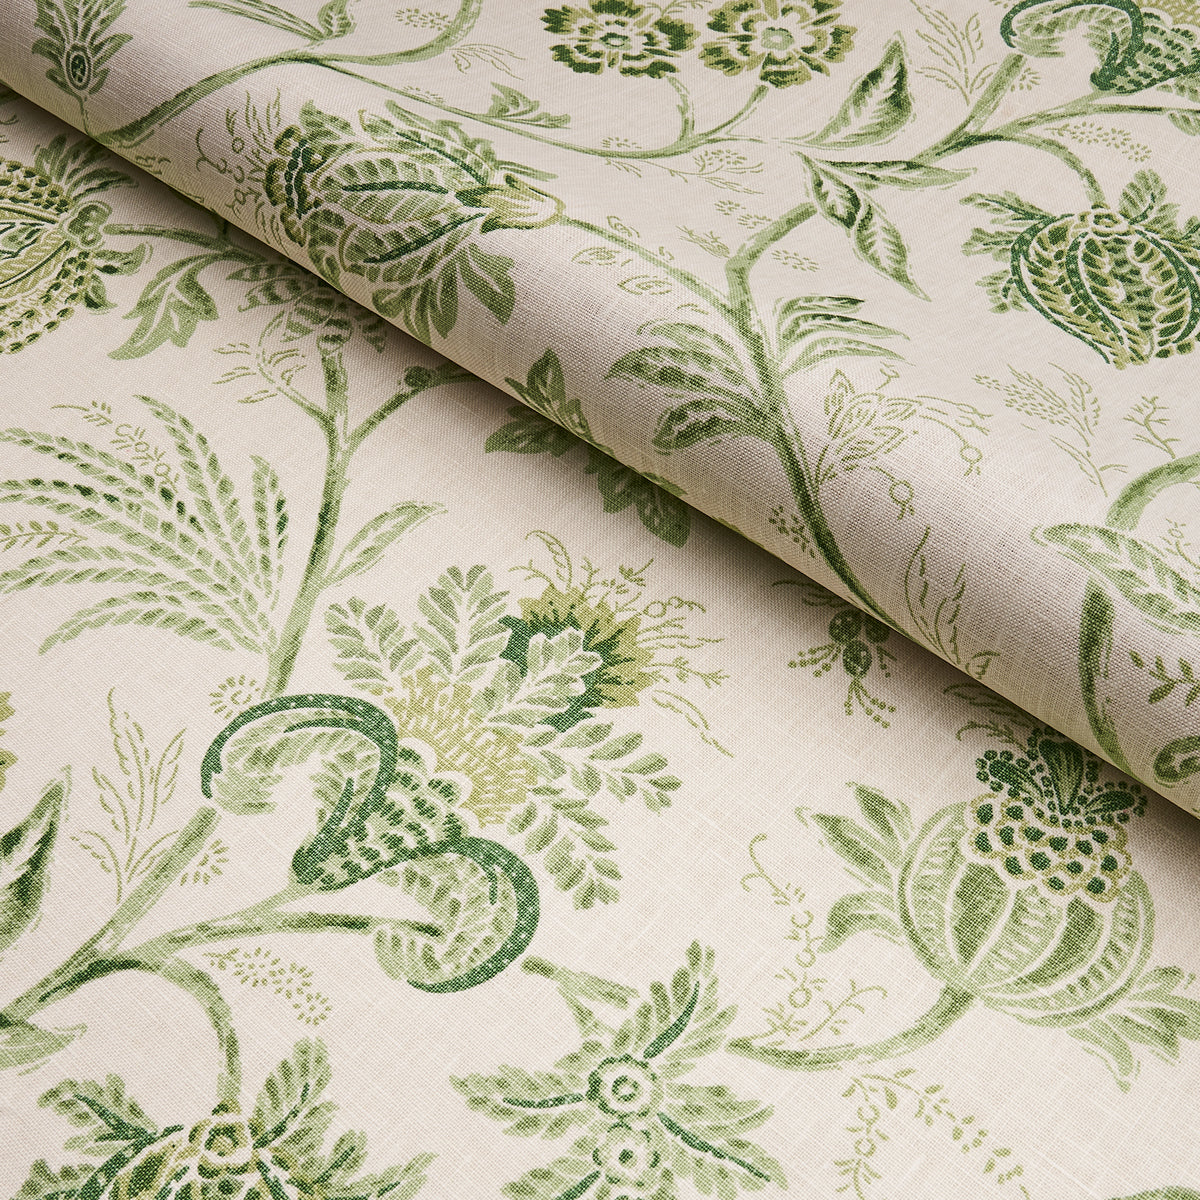 Purchase 176492 Chinoiserie Vine, Leaf Green by Schumacher Fabric 3